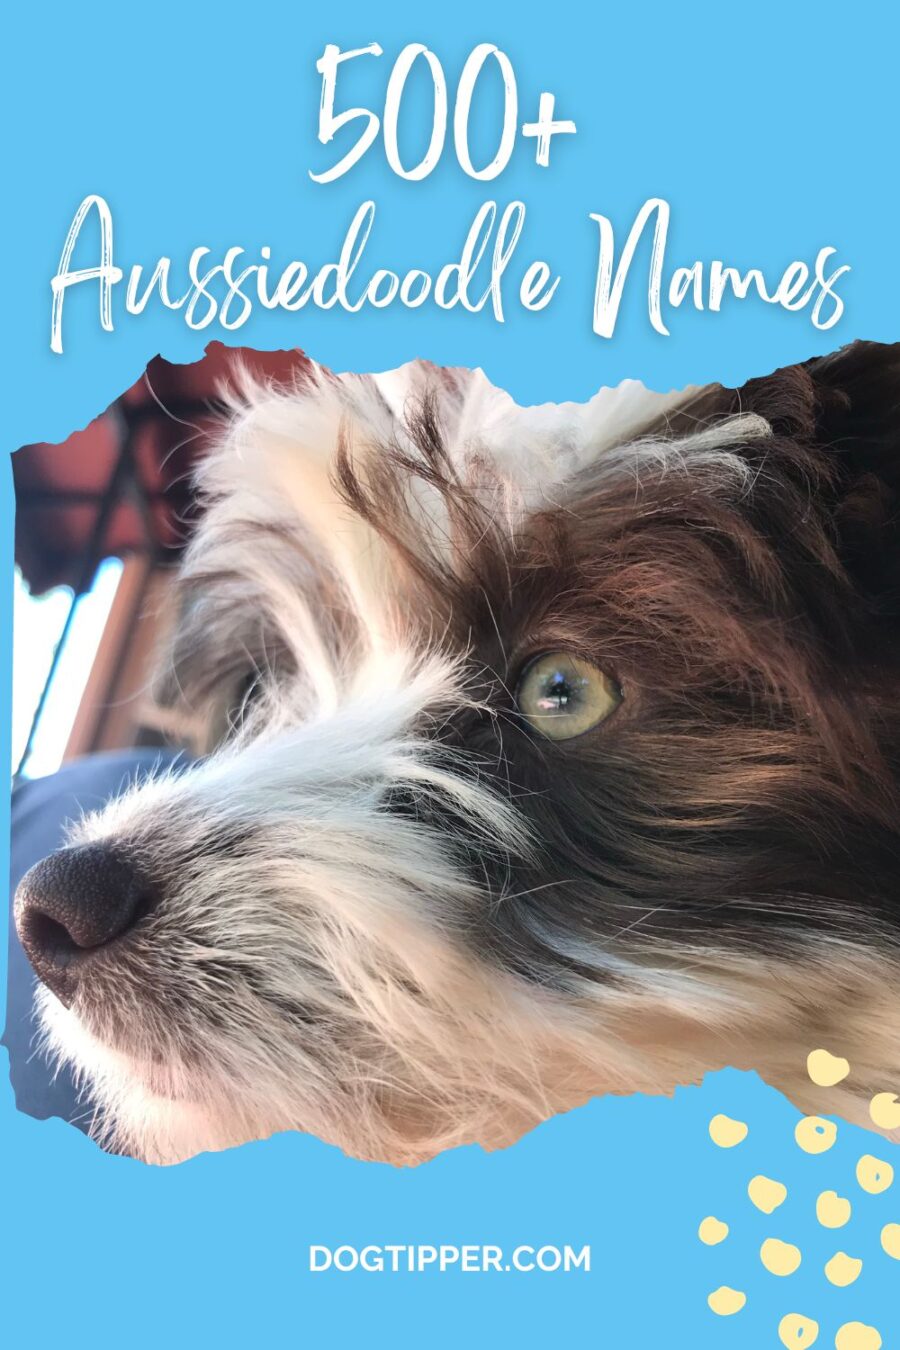 500+ Aussiedoodle Names for your Australian Shepherd and Poodle mix